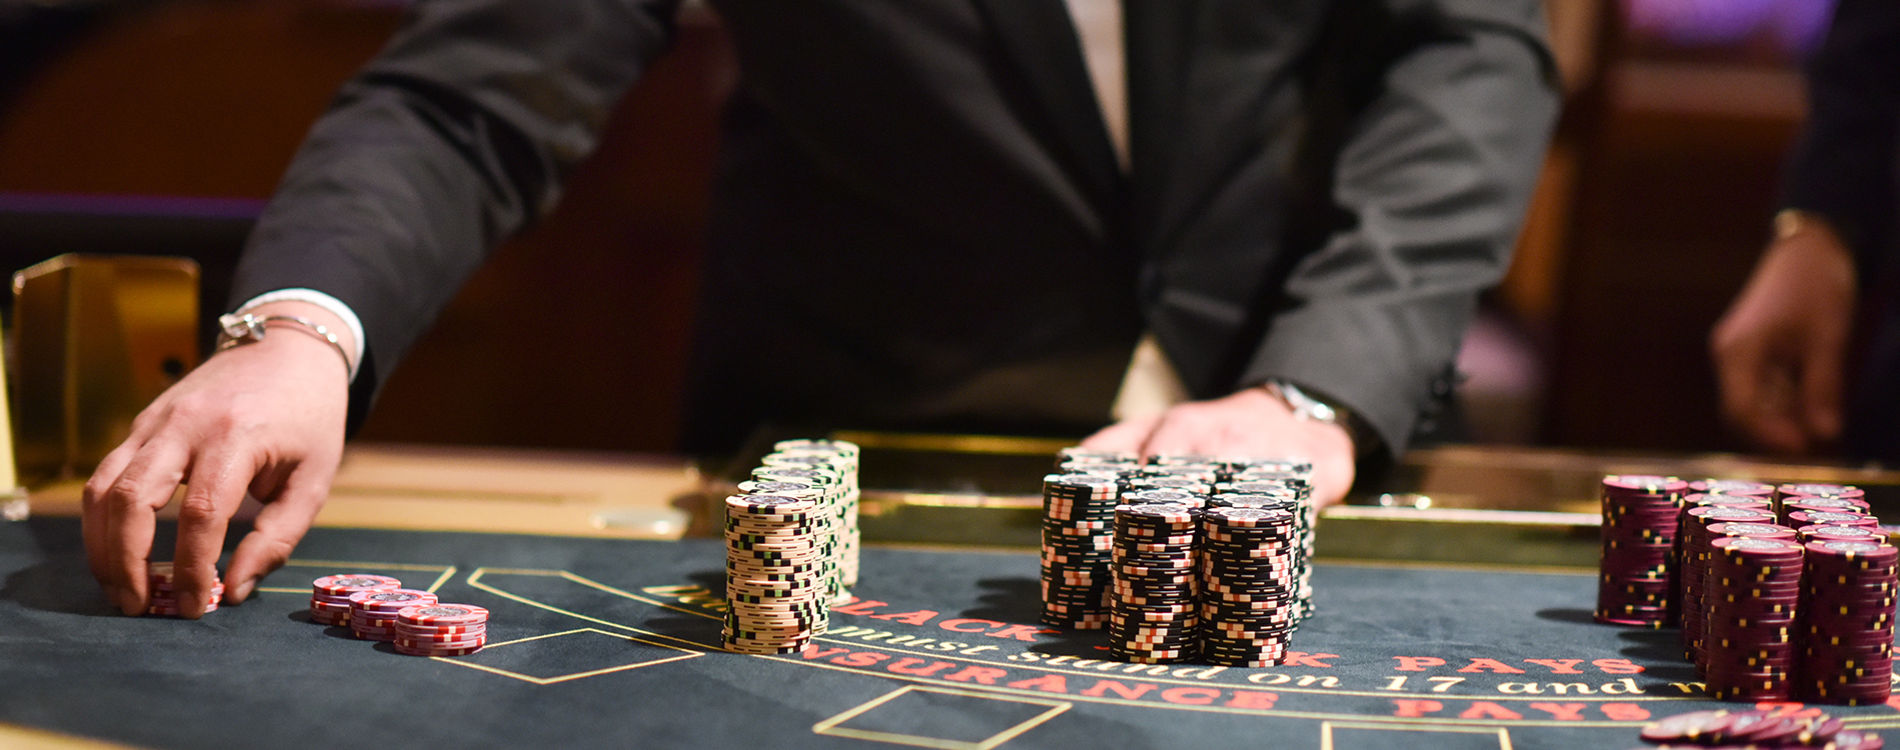 What are some of the health benefits of playing online casino games?